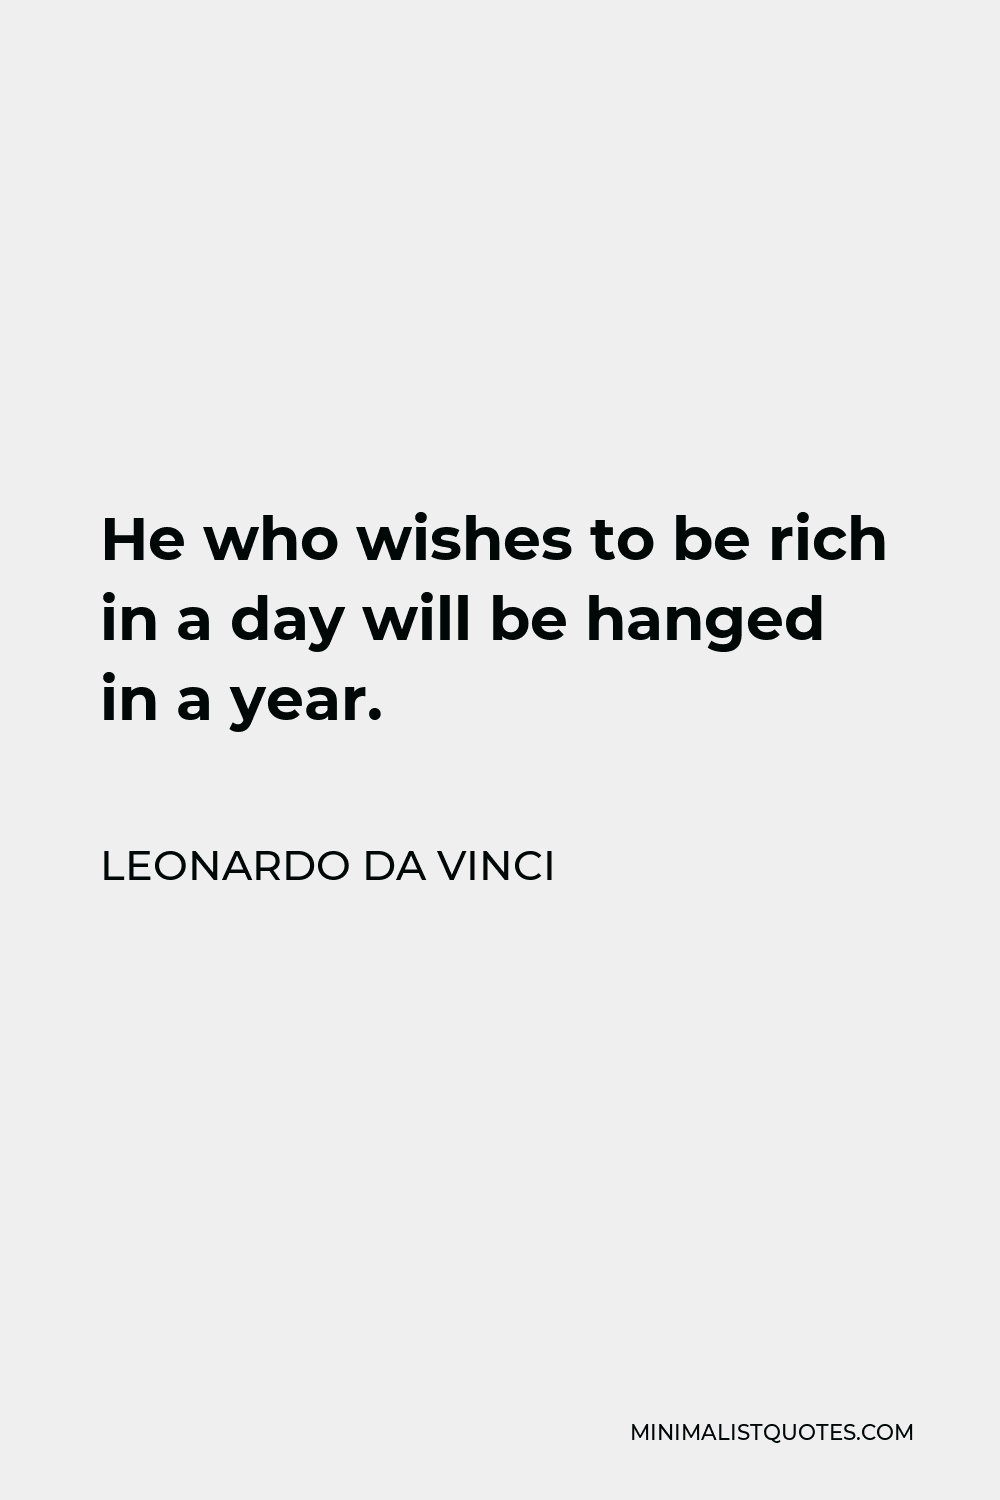 Leonardo da Vinci Quote - He who wishes to be rich in a day will be hanged in a year.